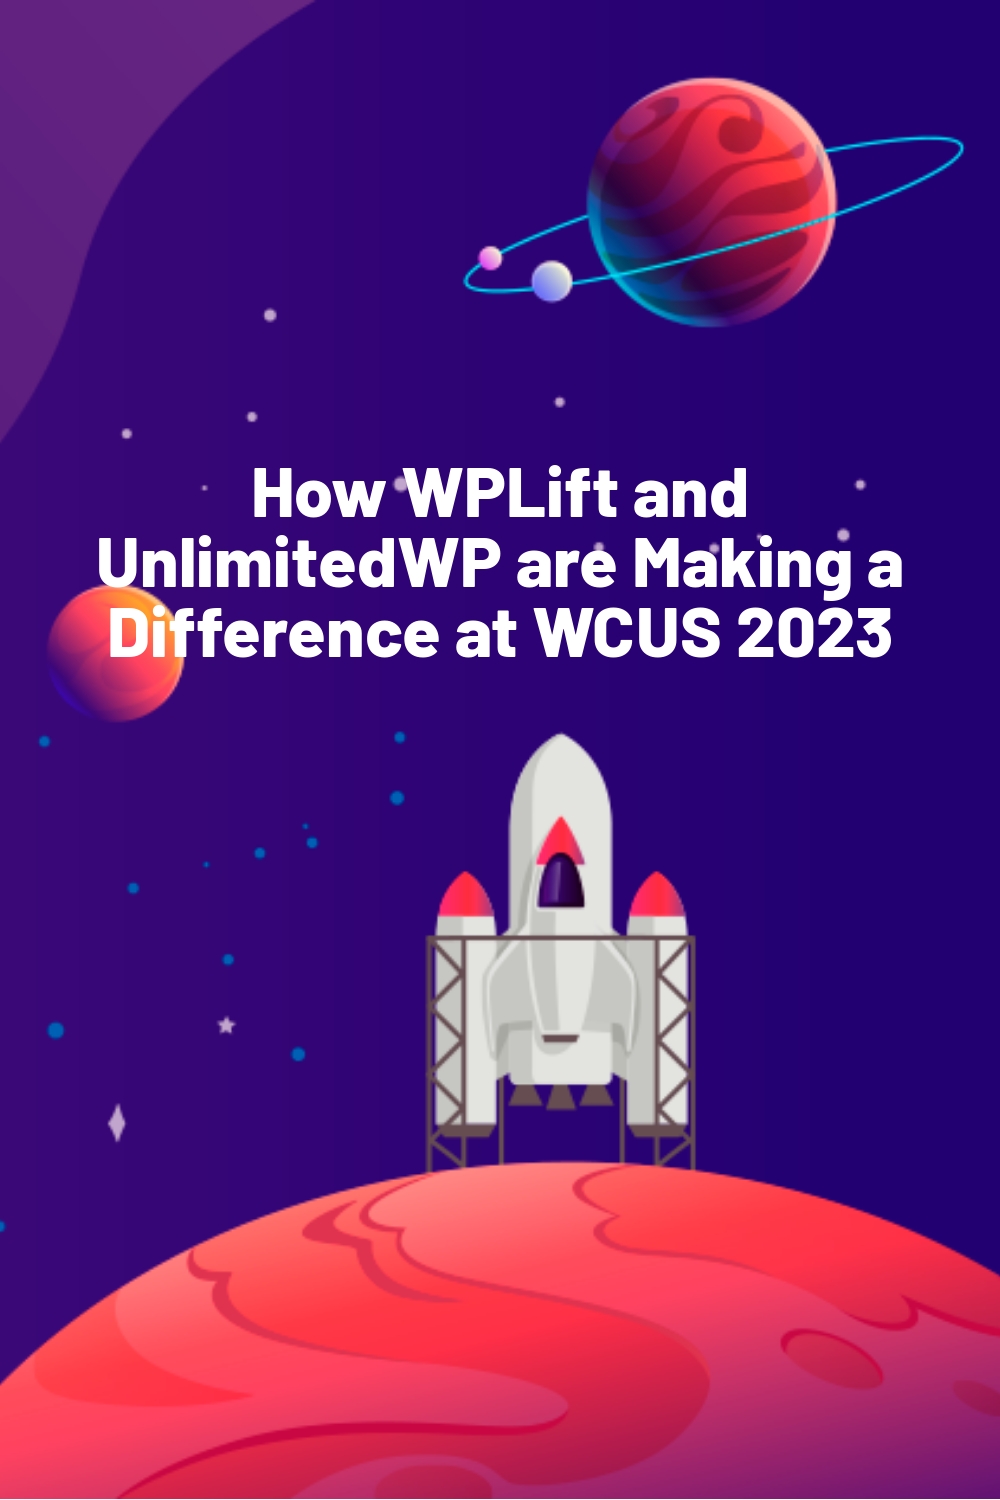 How WPLift and UnlimitedWP are Making a Difference at WCUS 2023